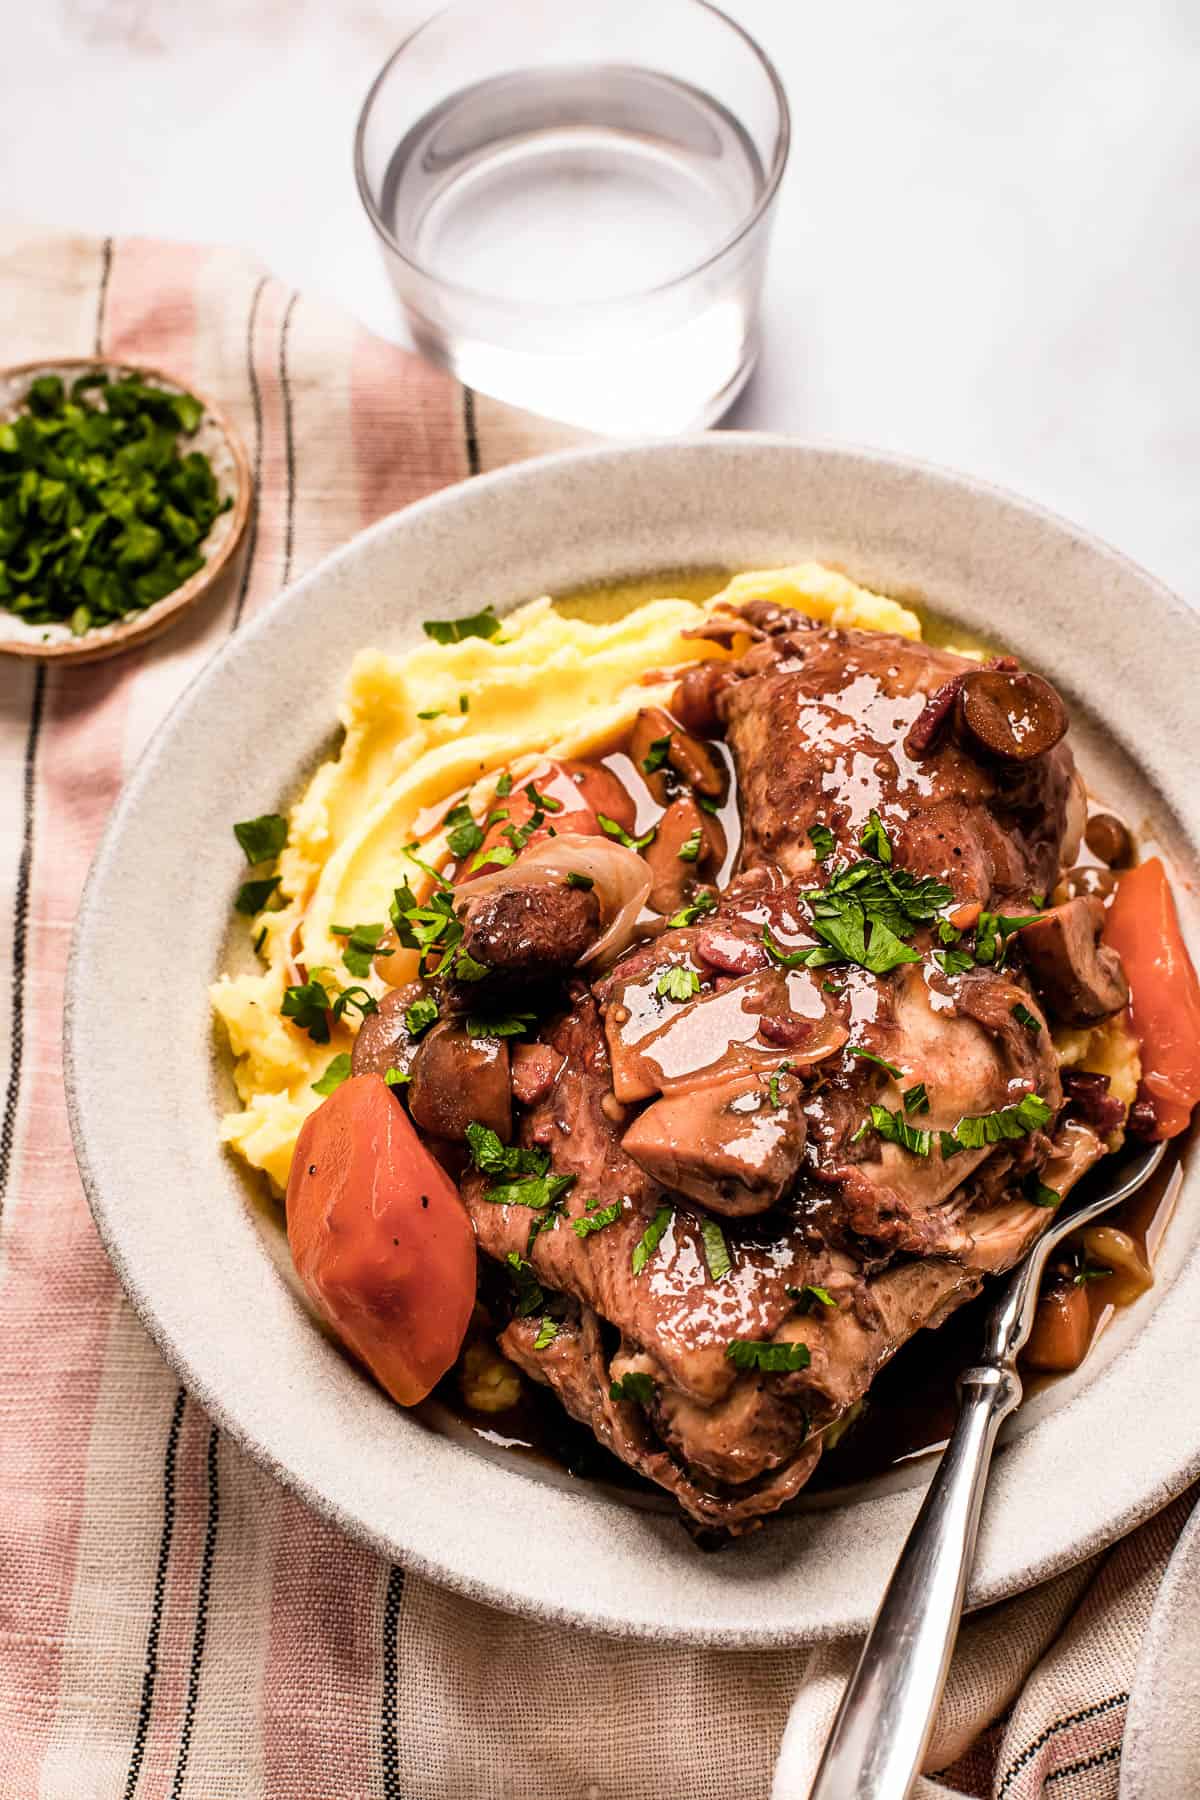 A serving of coq au vin with mashed potatoes on a stoneware plate.